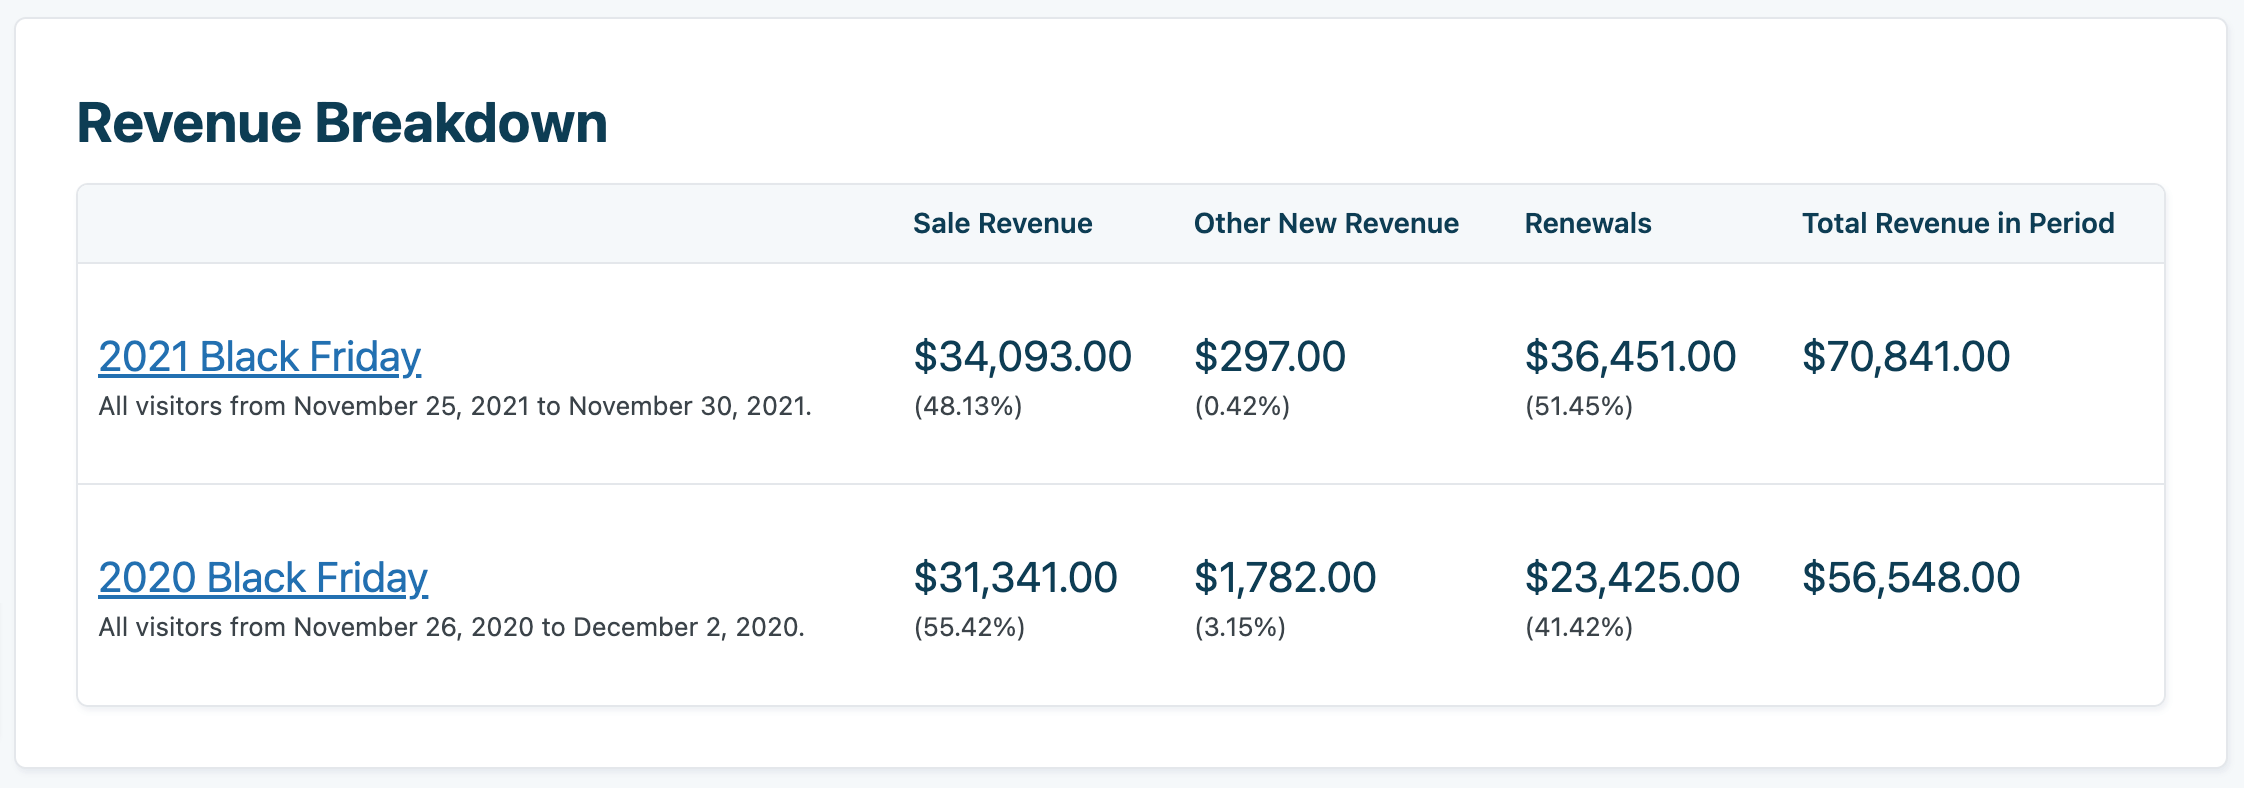 Compare revenue between two similar sale periods with Sitewide Sales v1.4